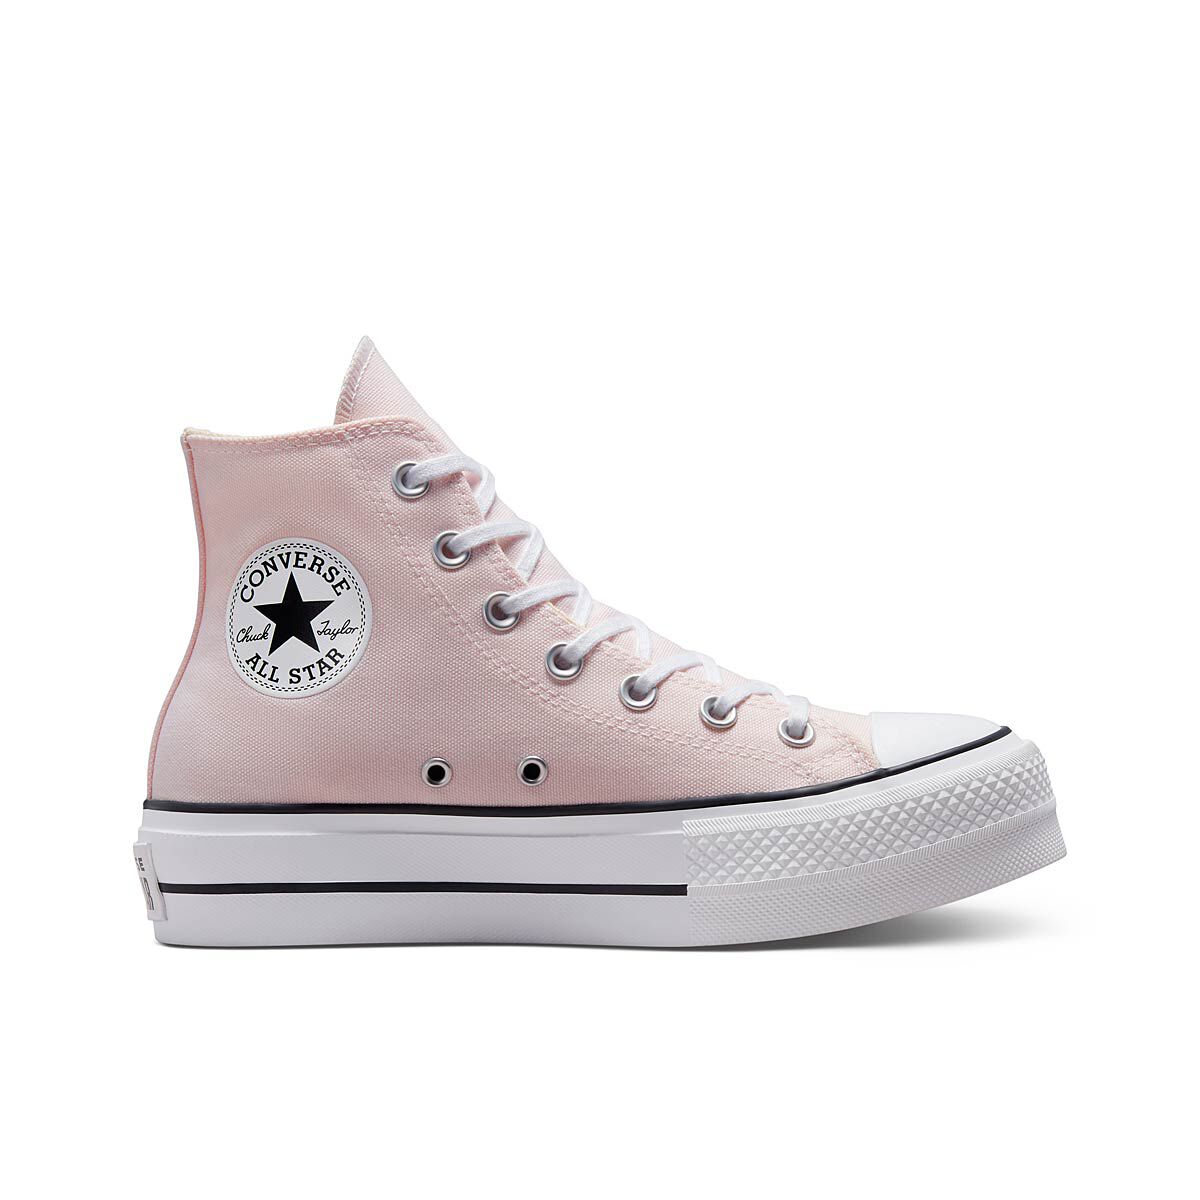 Sneakers and shoes Converse Pro Leather on sale